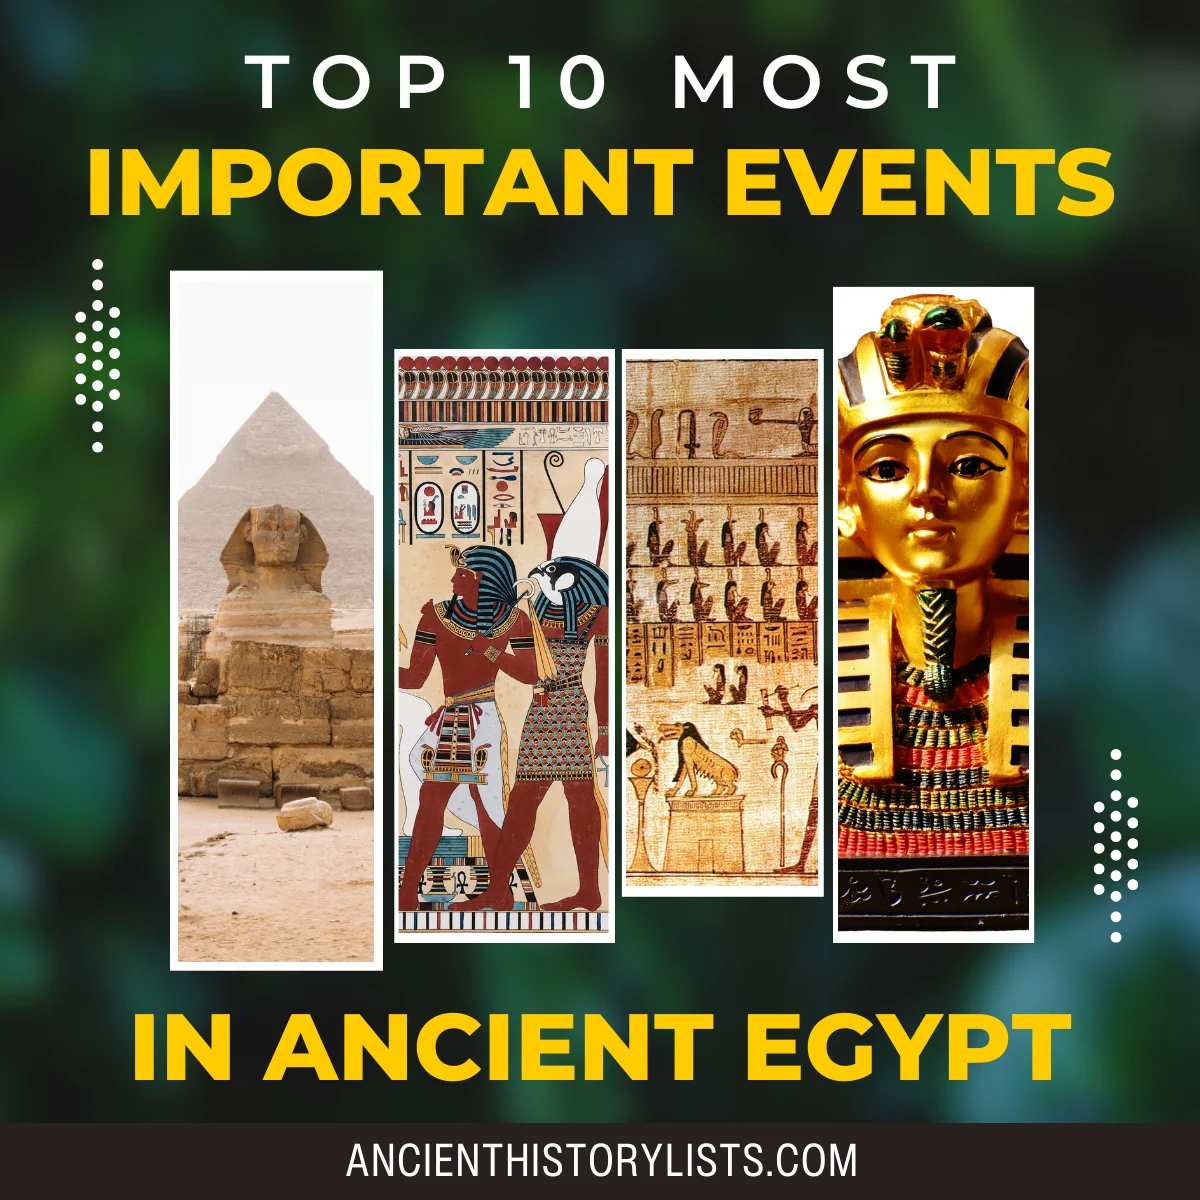 Most Important Events in Ancient Egypt